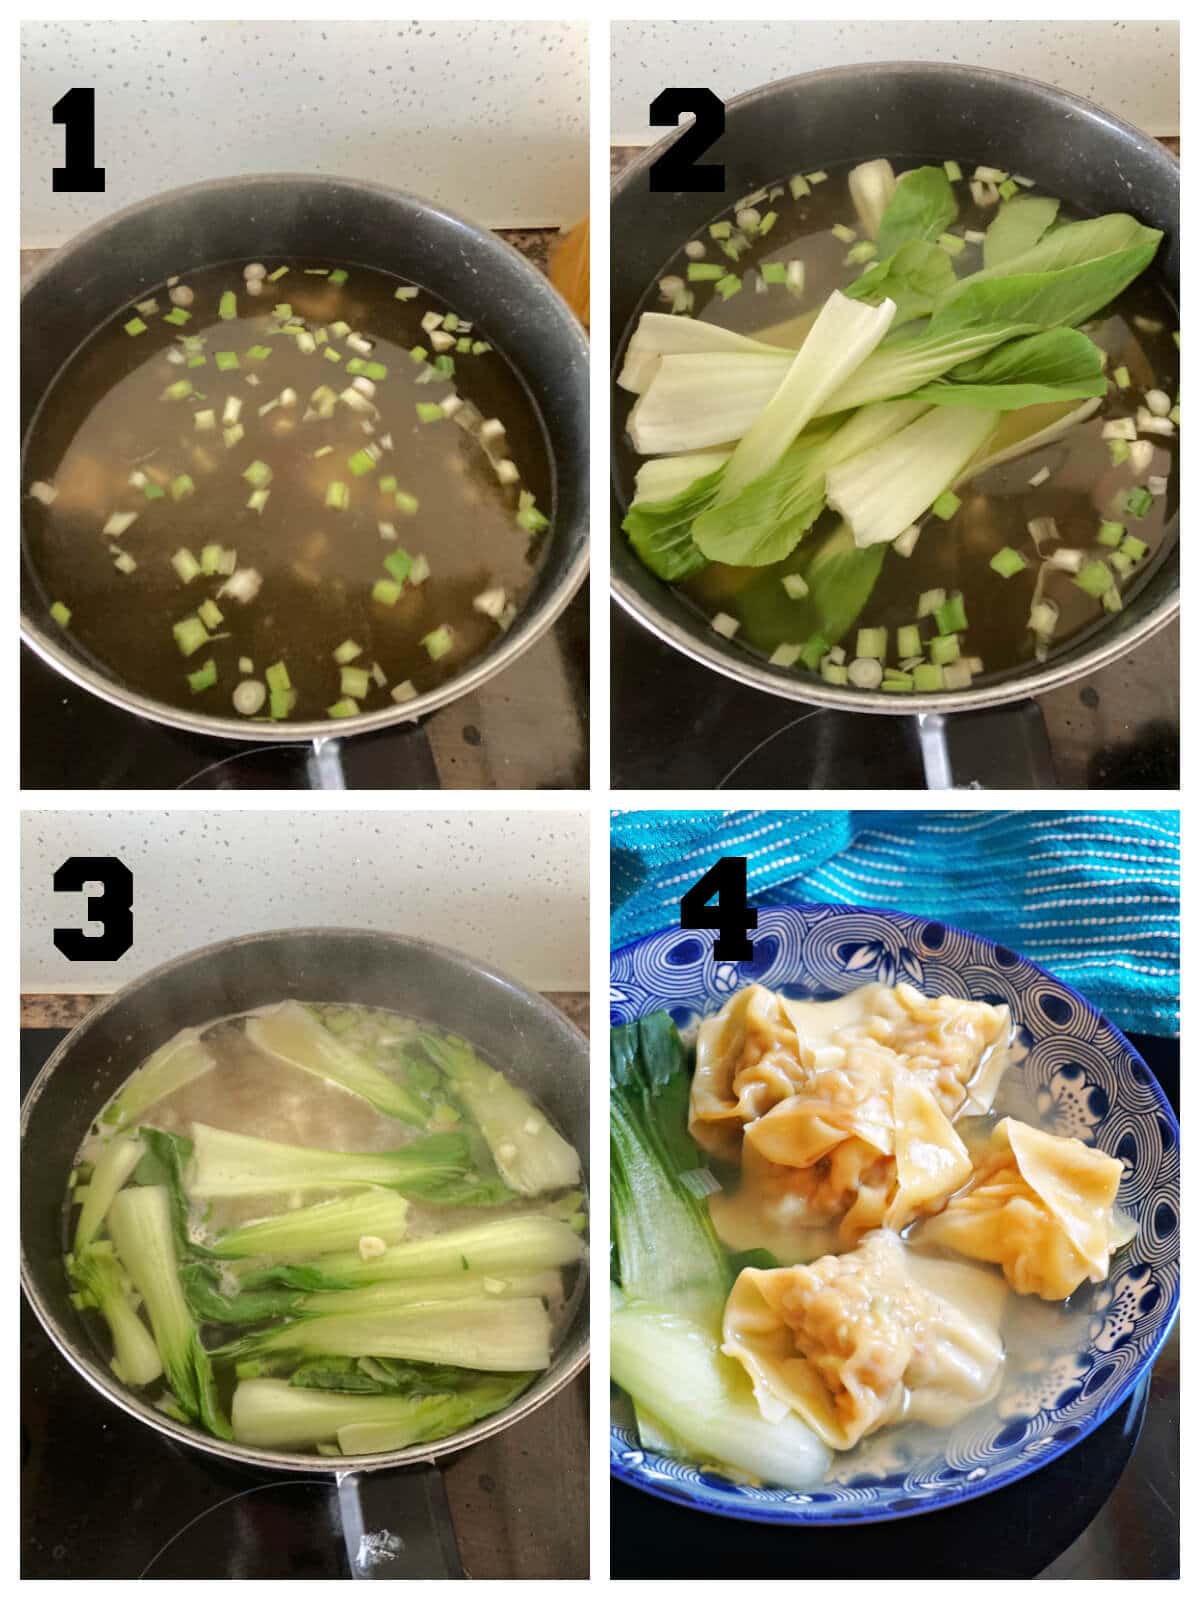 Collage of 4 photos to show how to make broth for wontons.